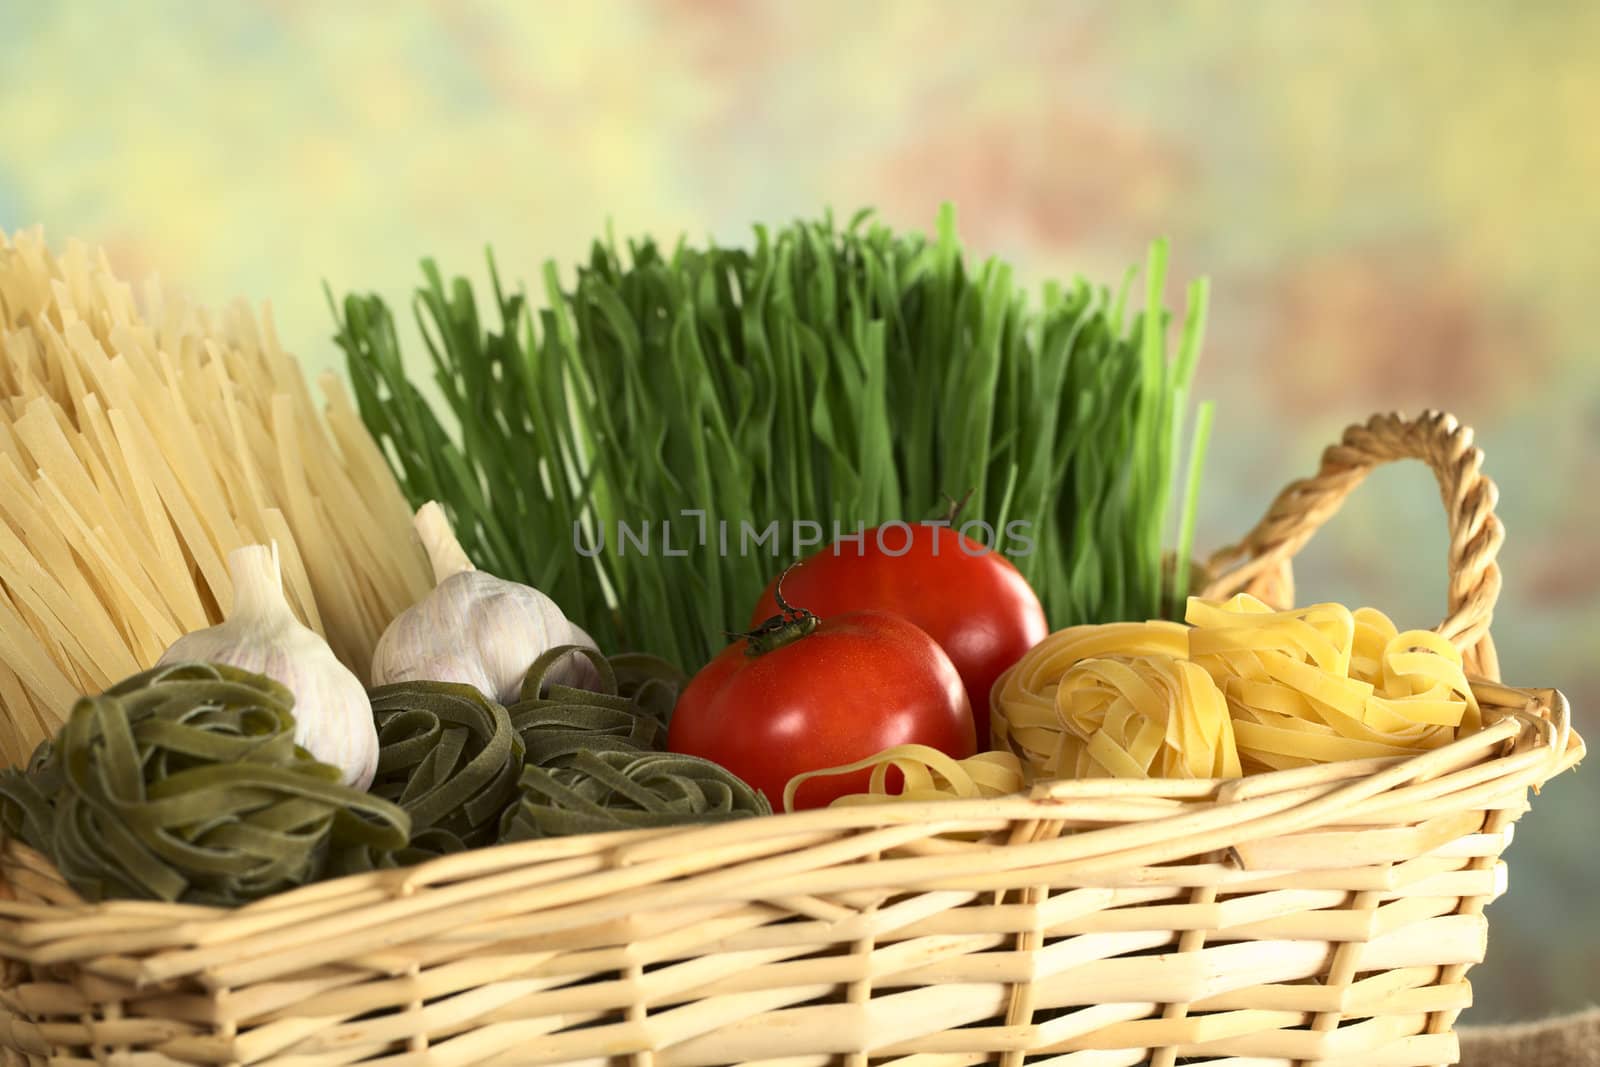 Raw Tagliatelle in Basket with Tomato and Garlic by sven